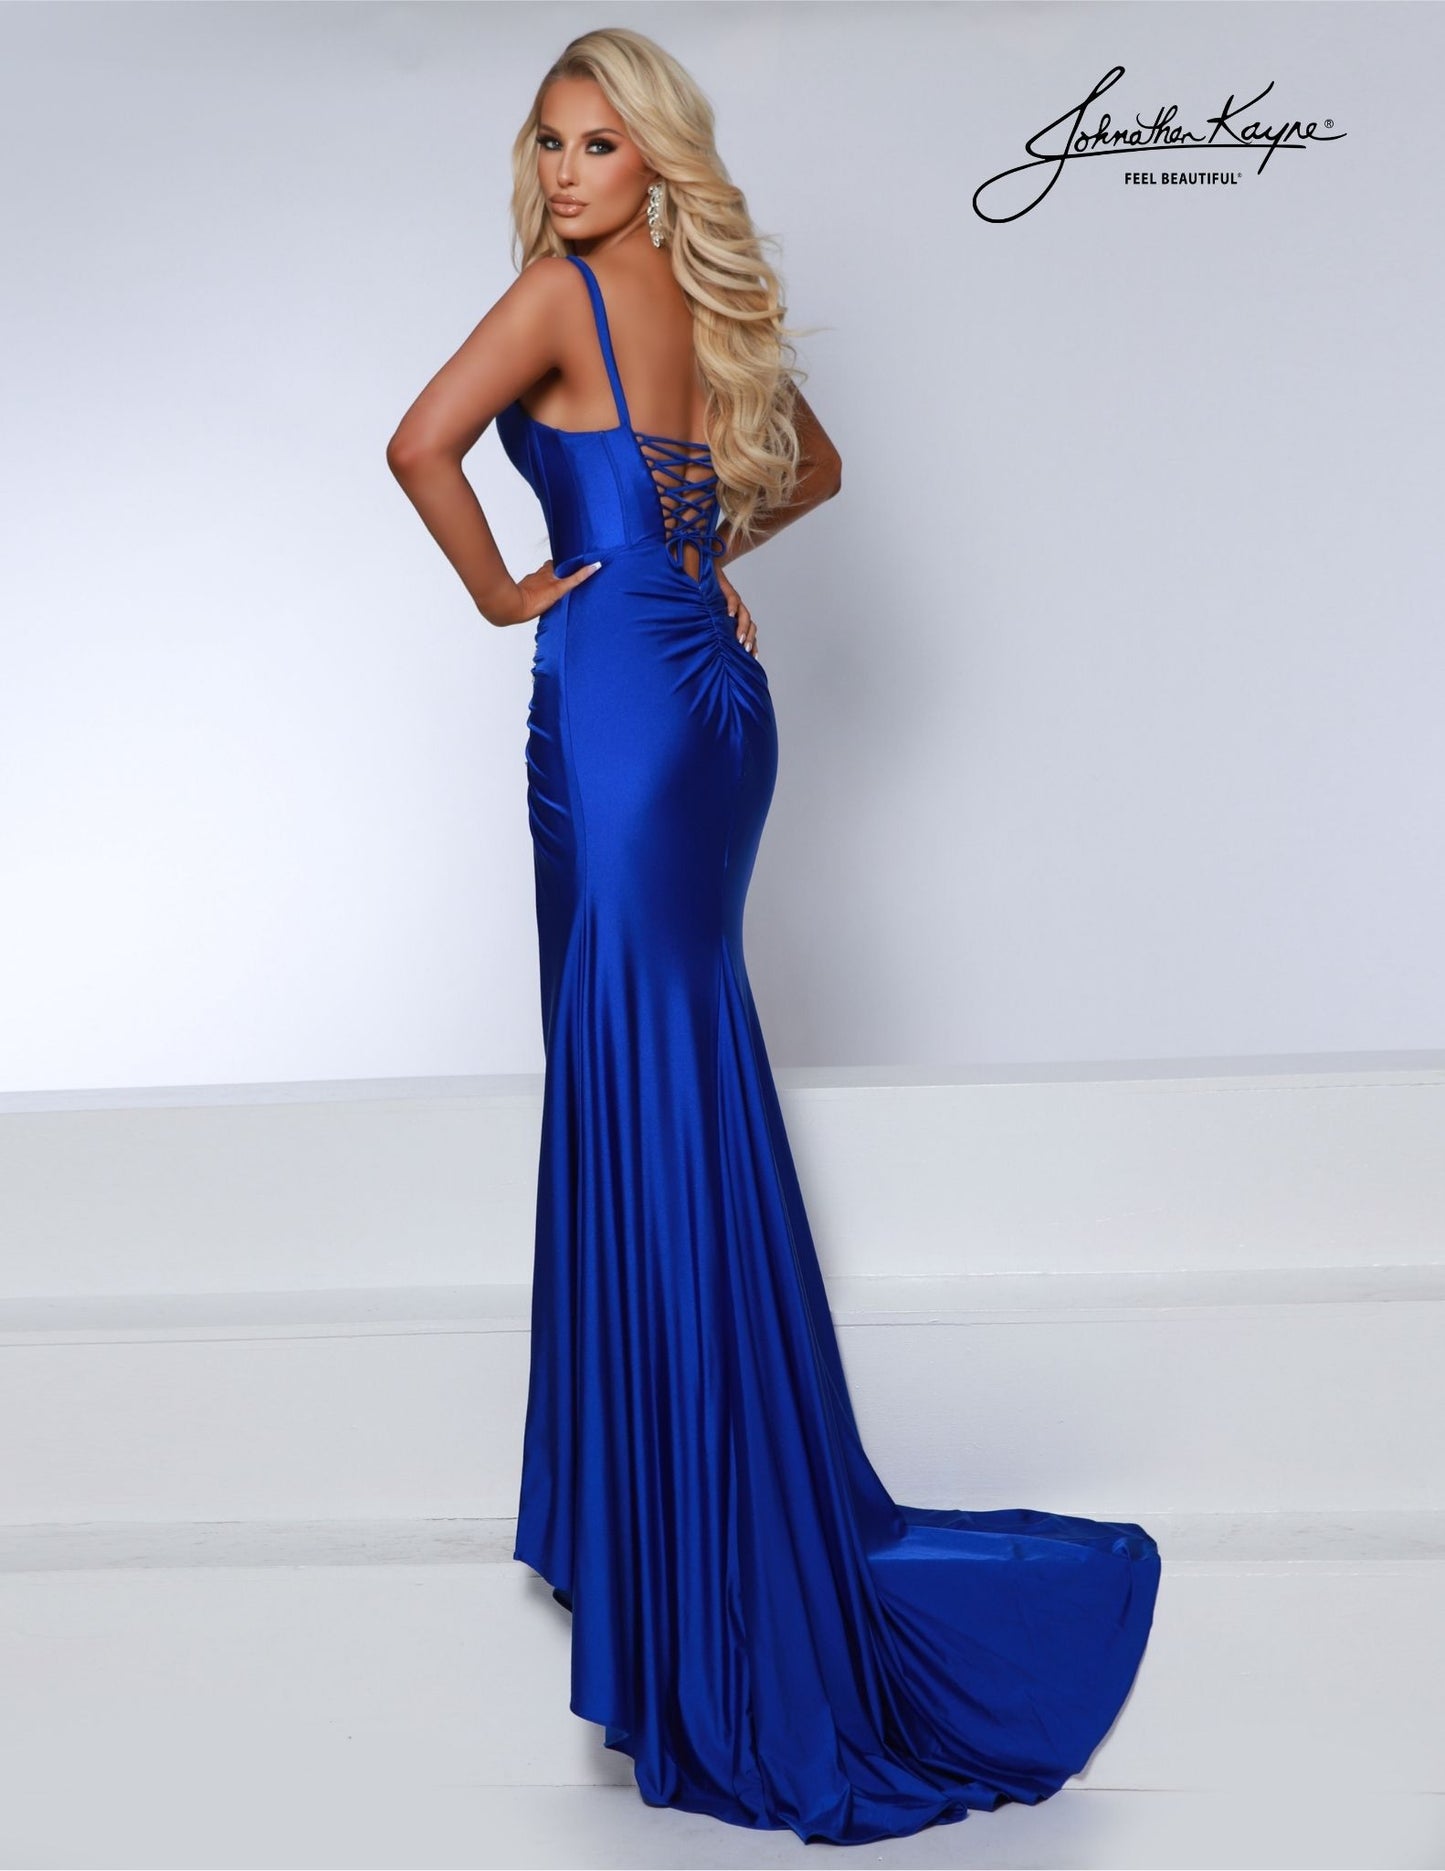 This Johnathan Kayne 2858 prom dress features a corset bodice with crystals, a tail of ruching, a V-neck, and a backless design. Perfect for a formal occasion like a pageant or prom, this silk gown exudes glamour and sophistication. Discover elegance in every detail with our 4-Way Stretch Lycra Gown. This masterpiece features exposed boning, a captivating corset back, and crystal-encrusted ruching, all culminating in a striking ensemble. The slit adds a dash of allure.